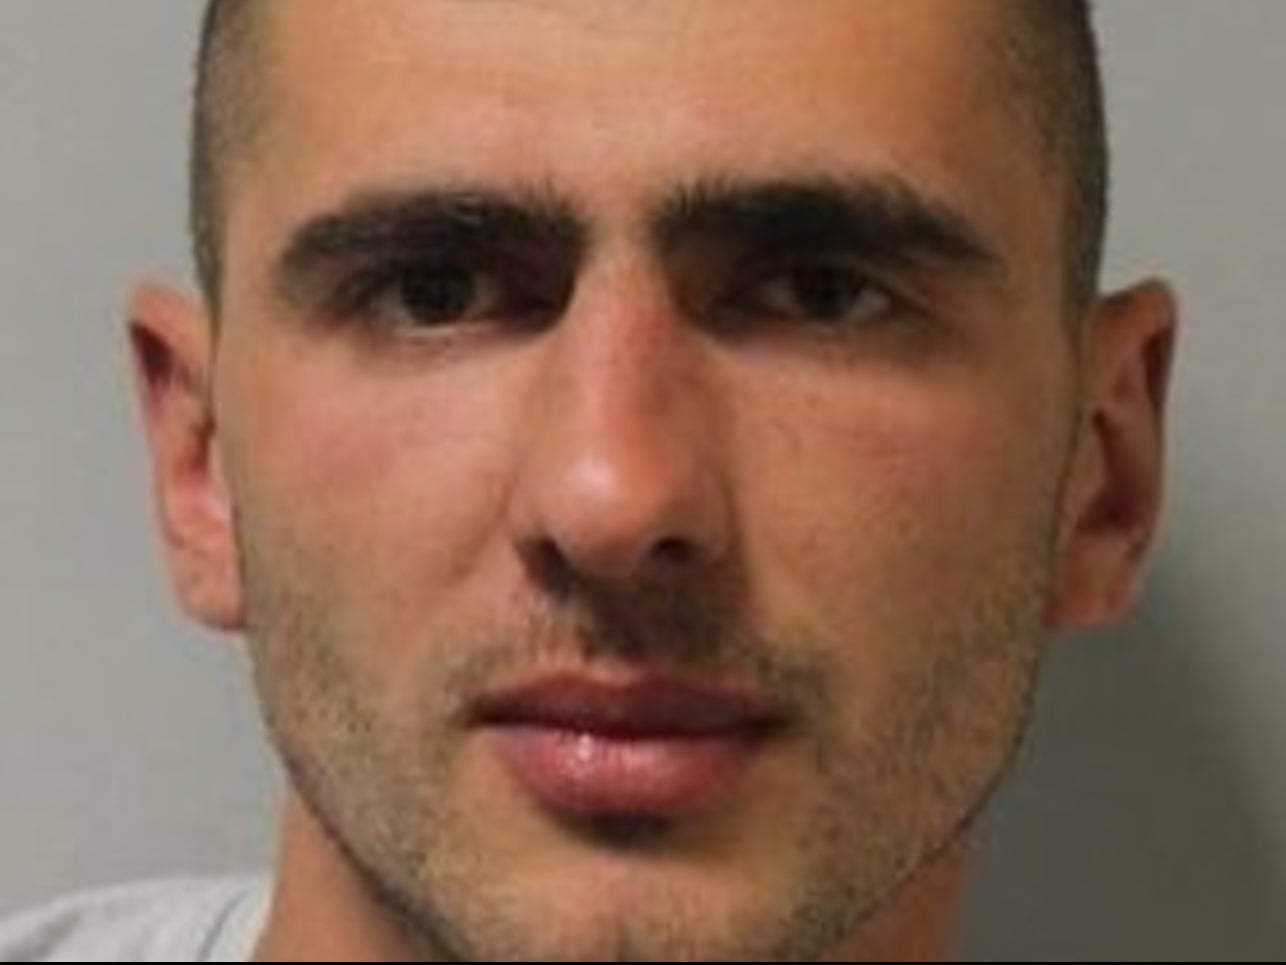 Police want to speak to Ioan Bilasco about an incident in which a woman was assaulted